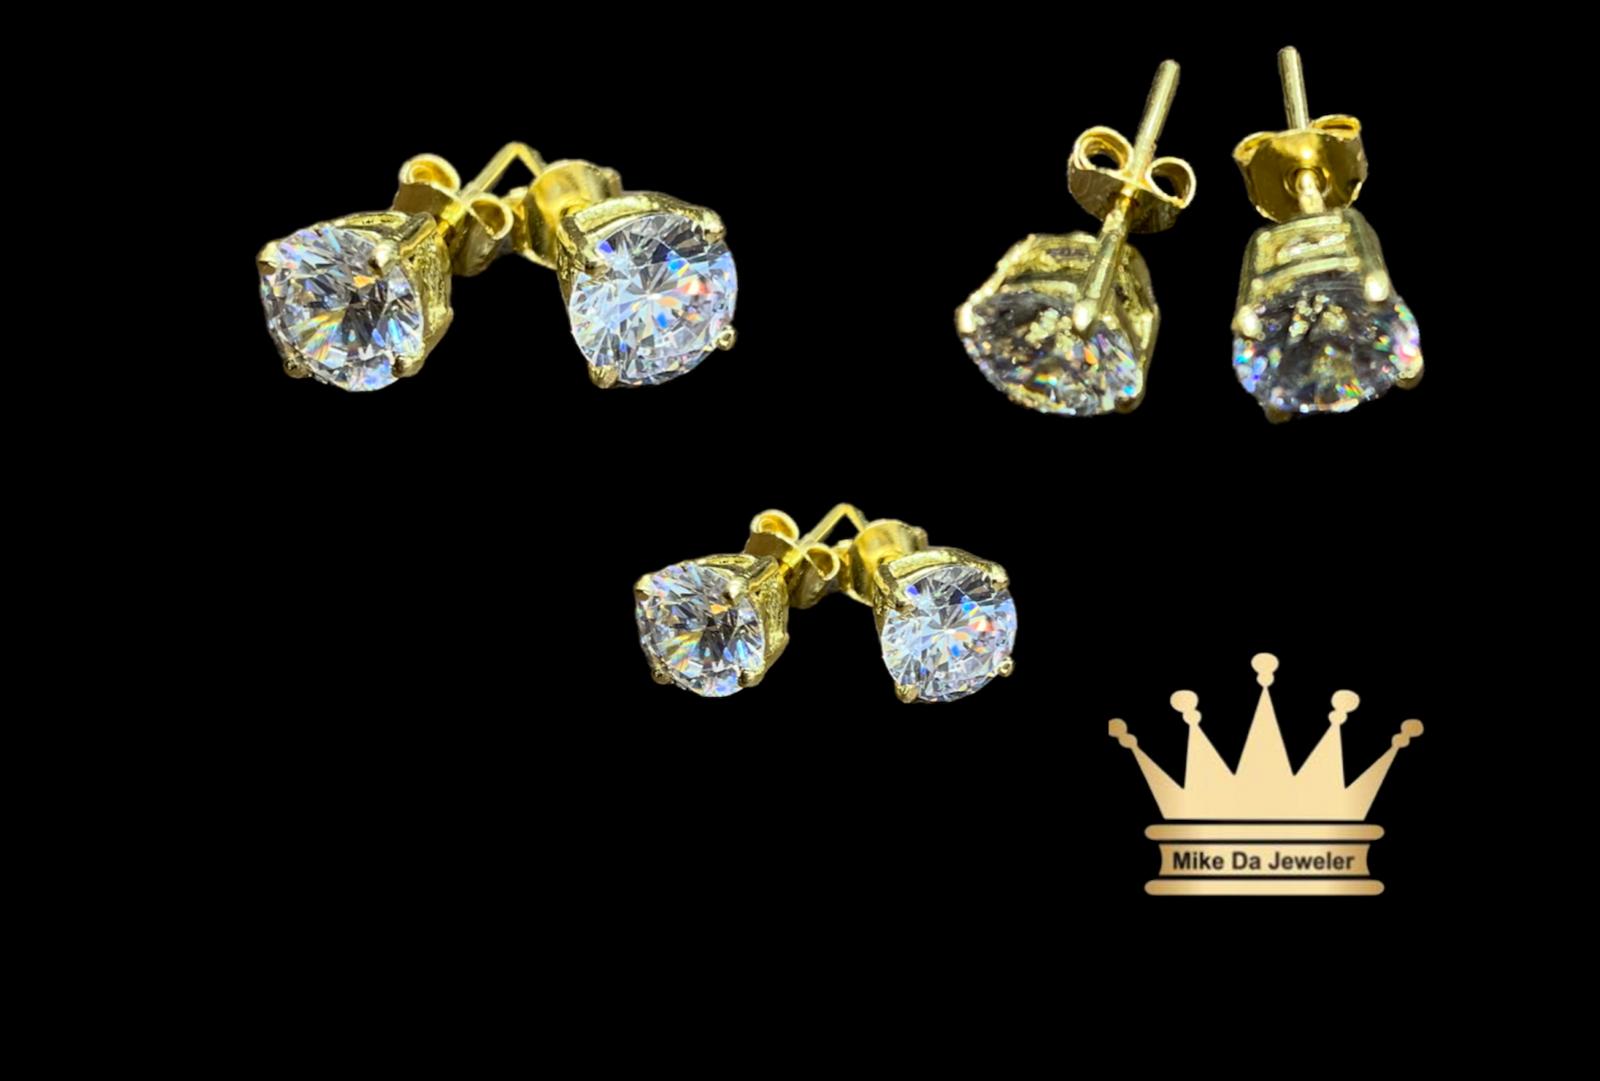 18k handmade studs earring pair Price $240 usd wieght 1.97 usd 5 mm with cubic zirconia available stock 3,4,5,6,7,8,mm 18k,21k gold with screw back too